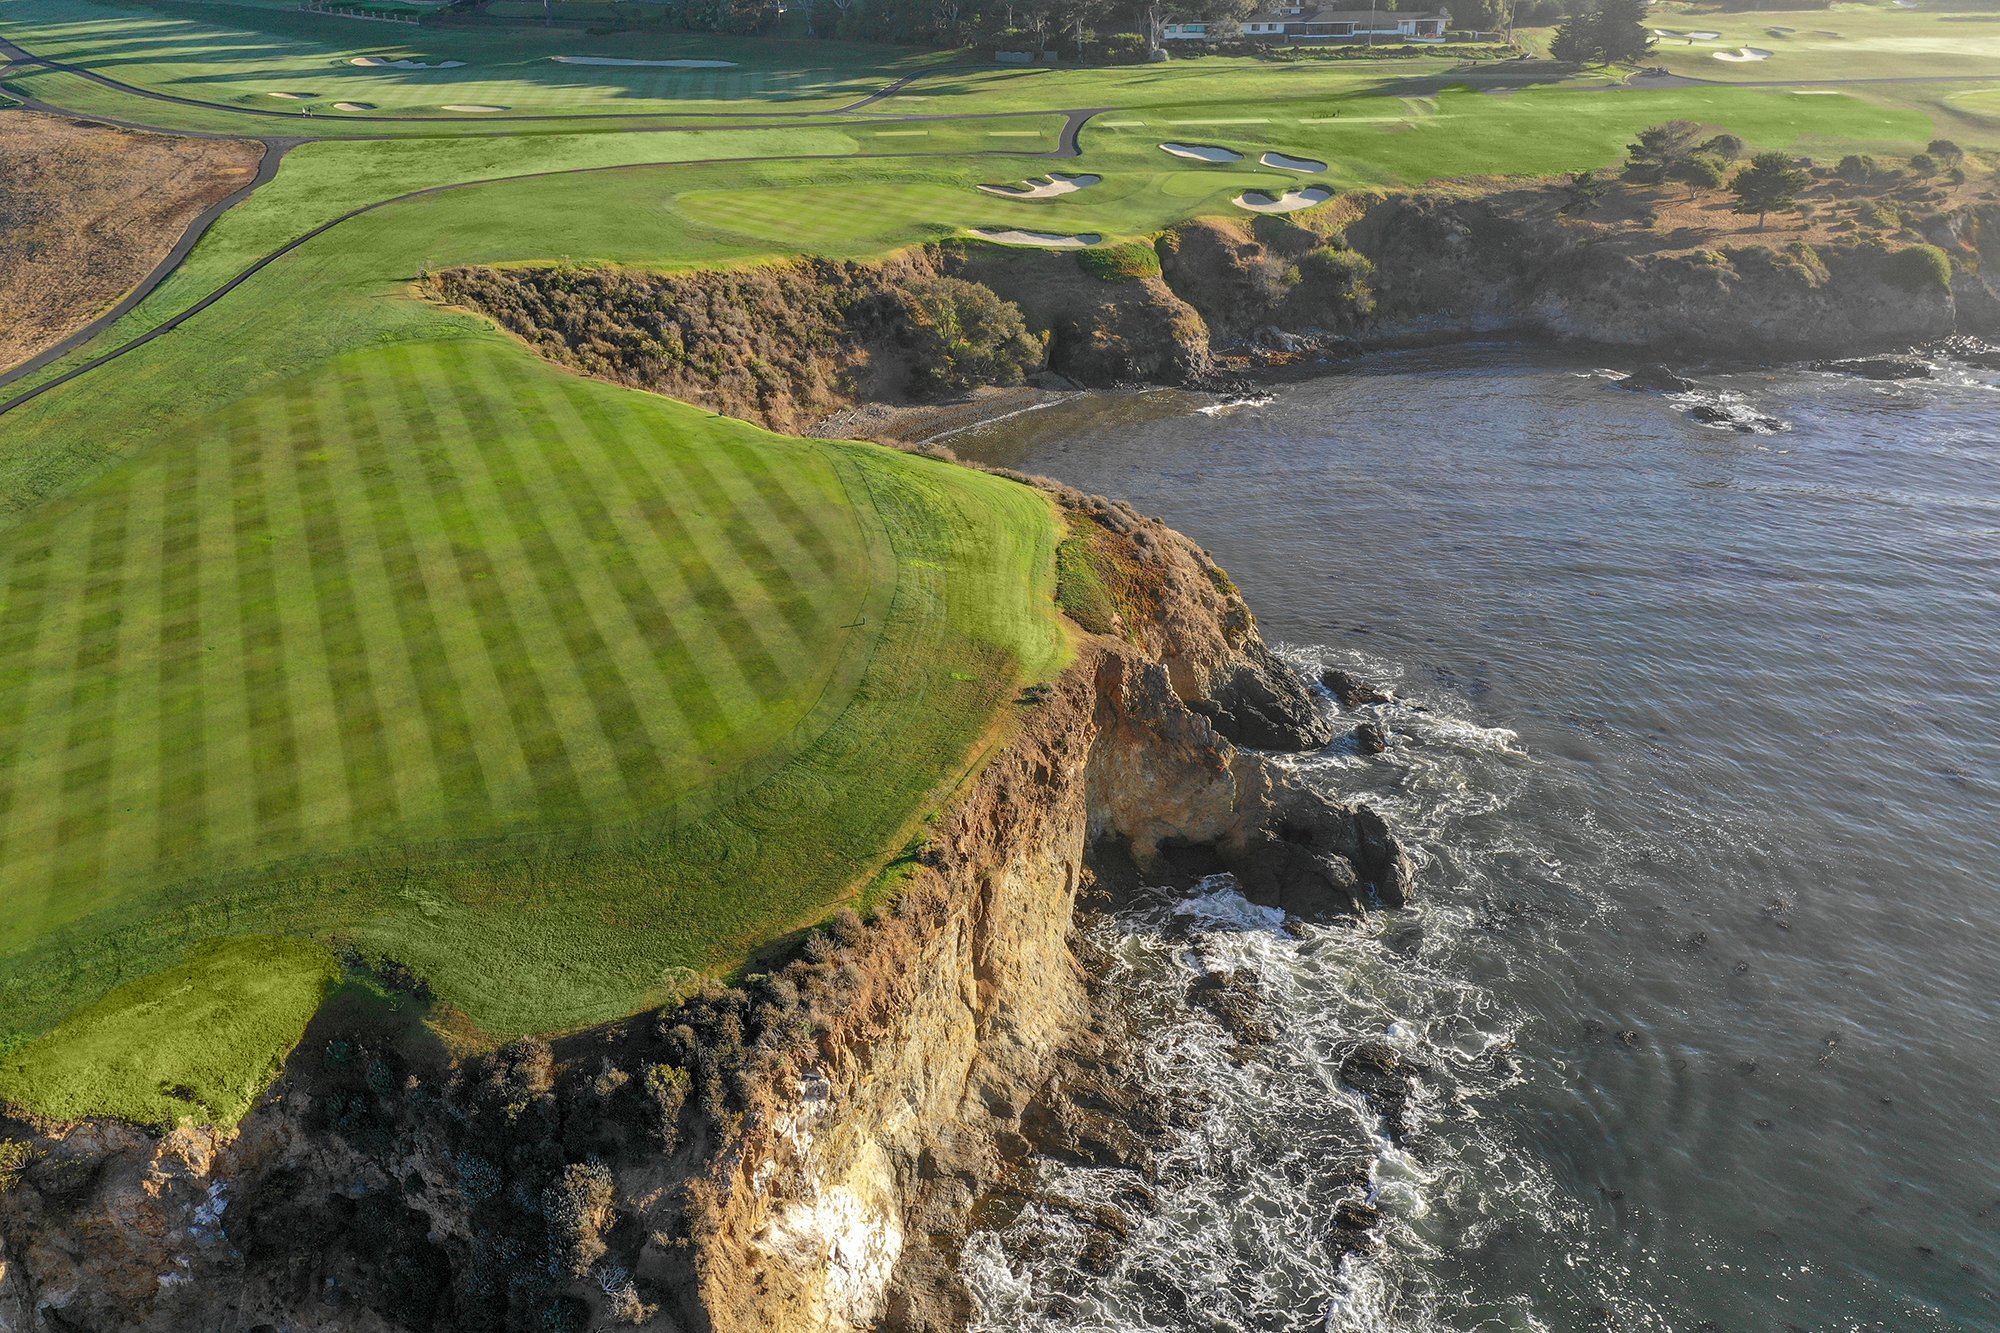 These are What U.S. Open Fairways Look Like at Pebble Beach